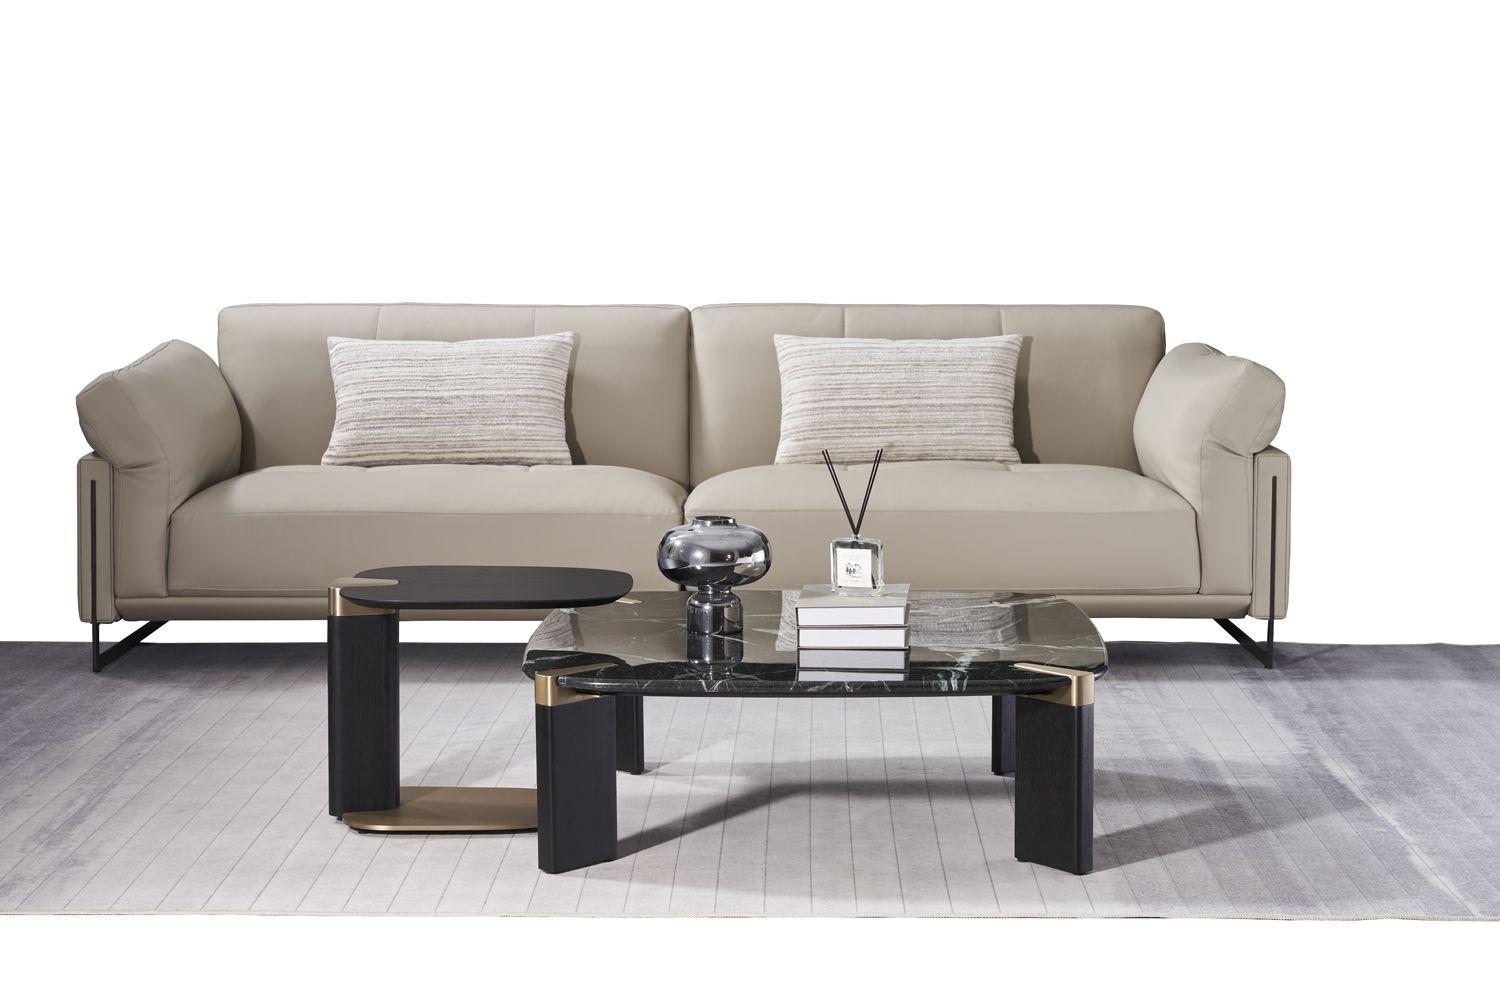 American Eagle Furniture CT-J3133 / ET-J3133 Coffee Table and End Table Set